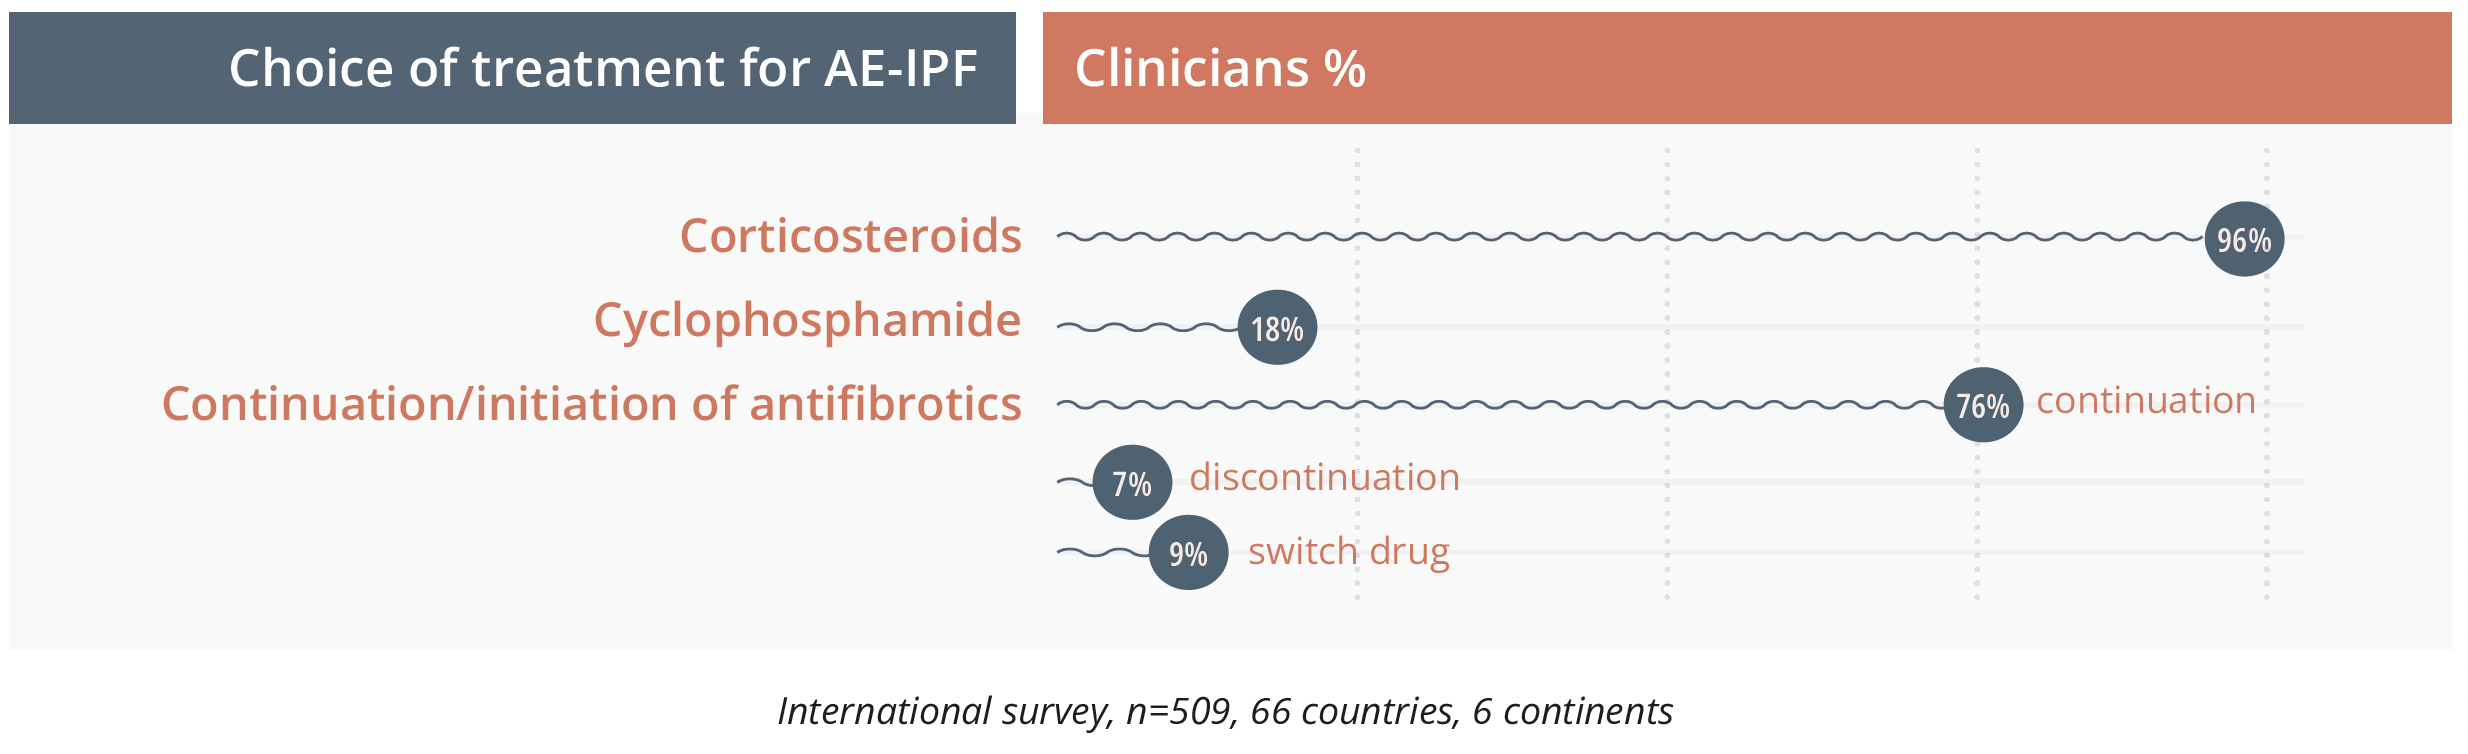 Majority of physicians still use corticosteroids for acute exacerbations of interstitial pulmonary fibrosis